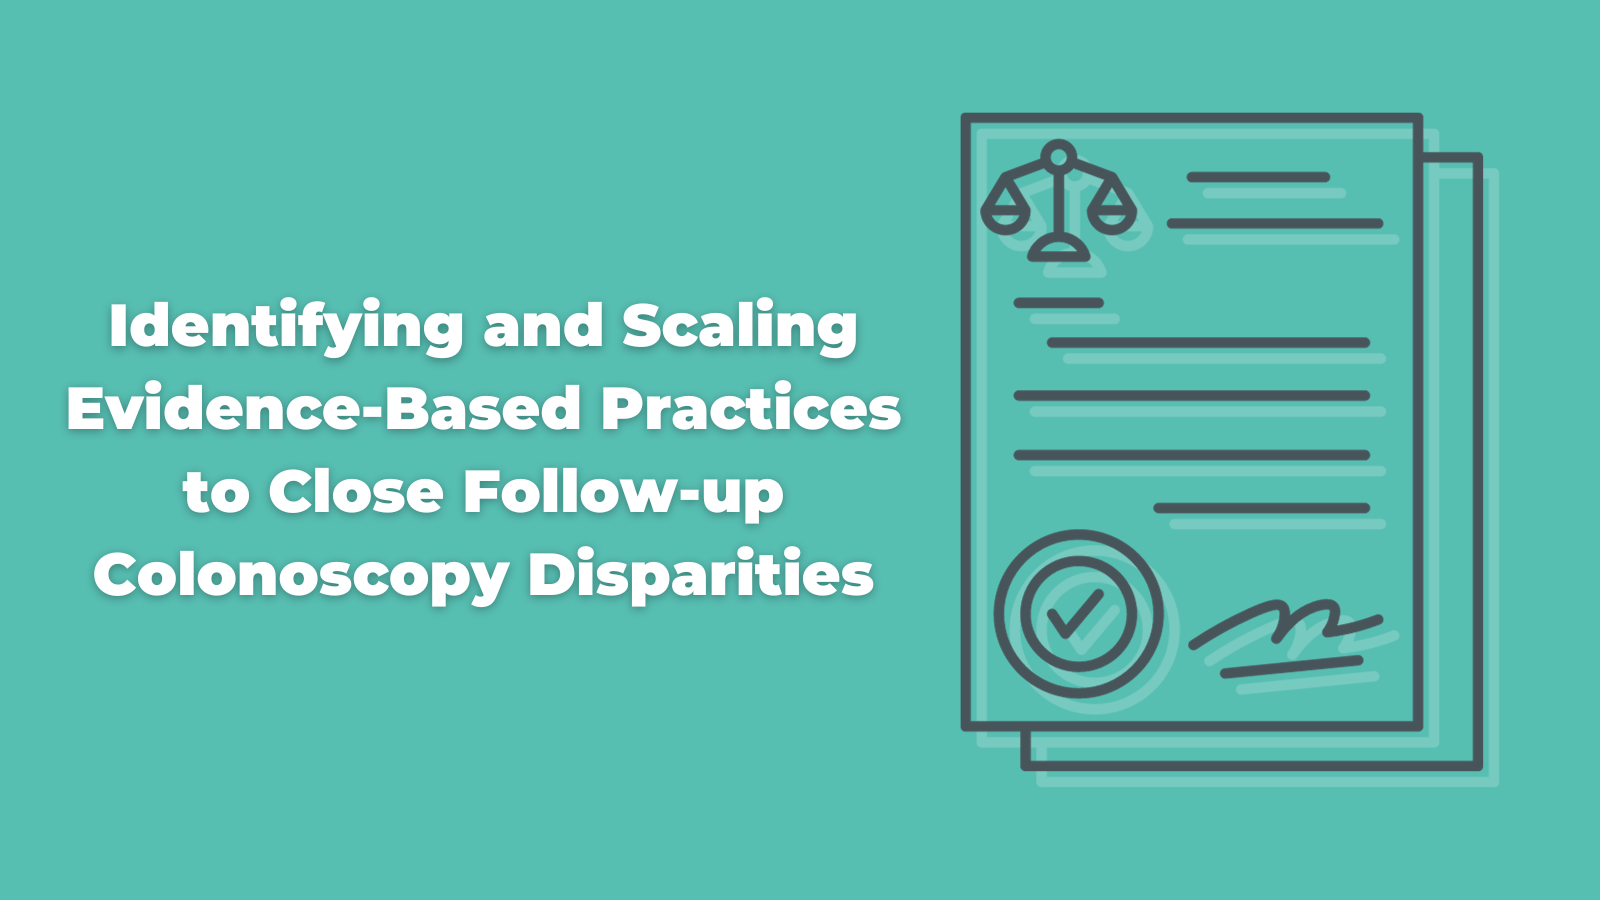 Identifying and Scaling Evidence-Based Practices to Close Follow-up Colonoscopy Disparities